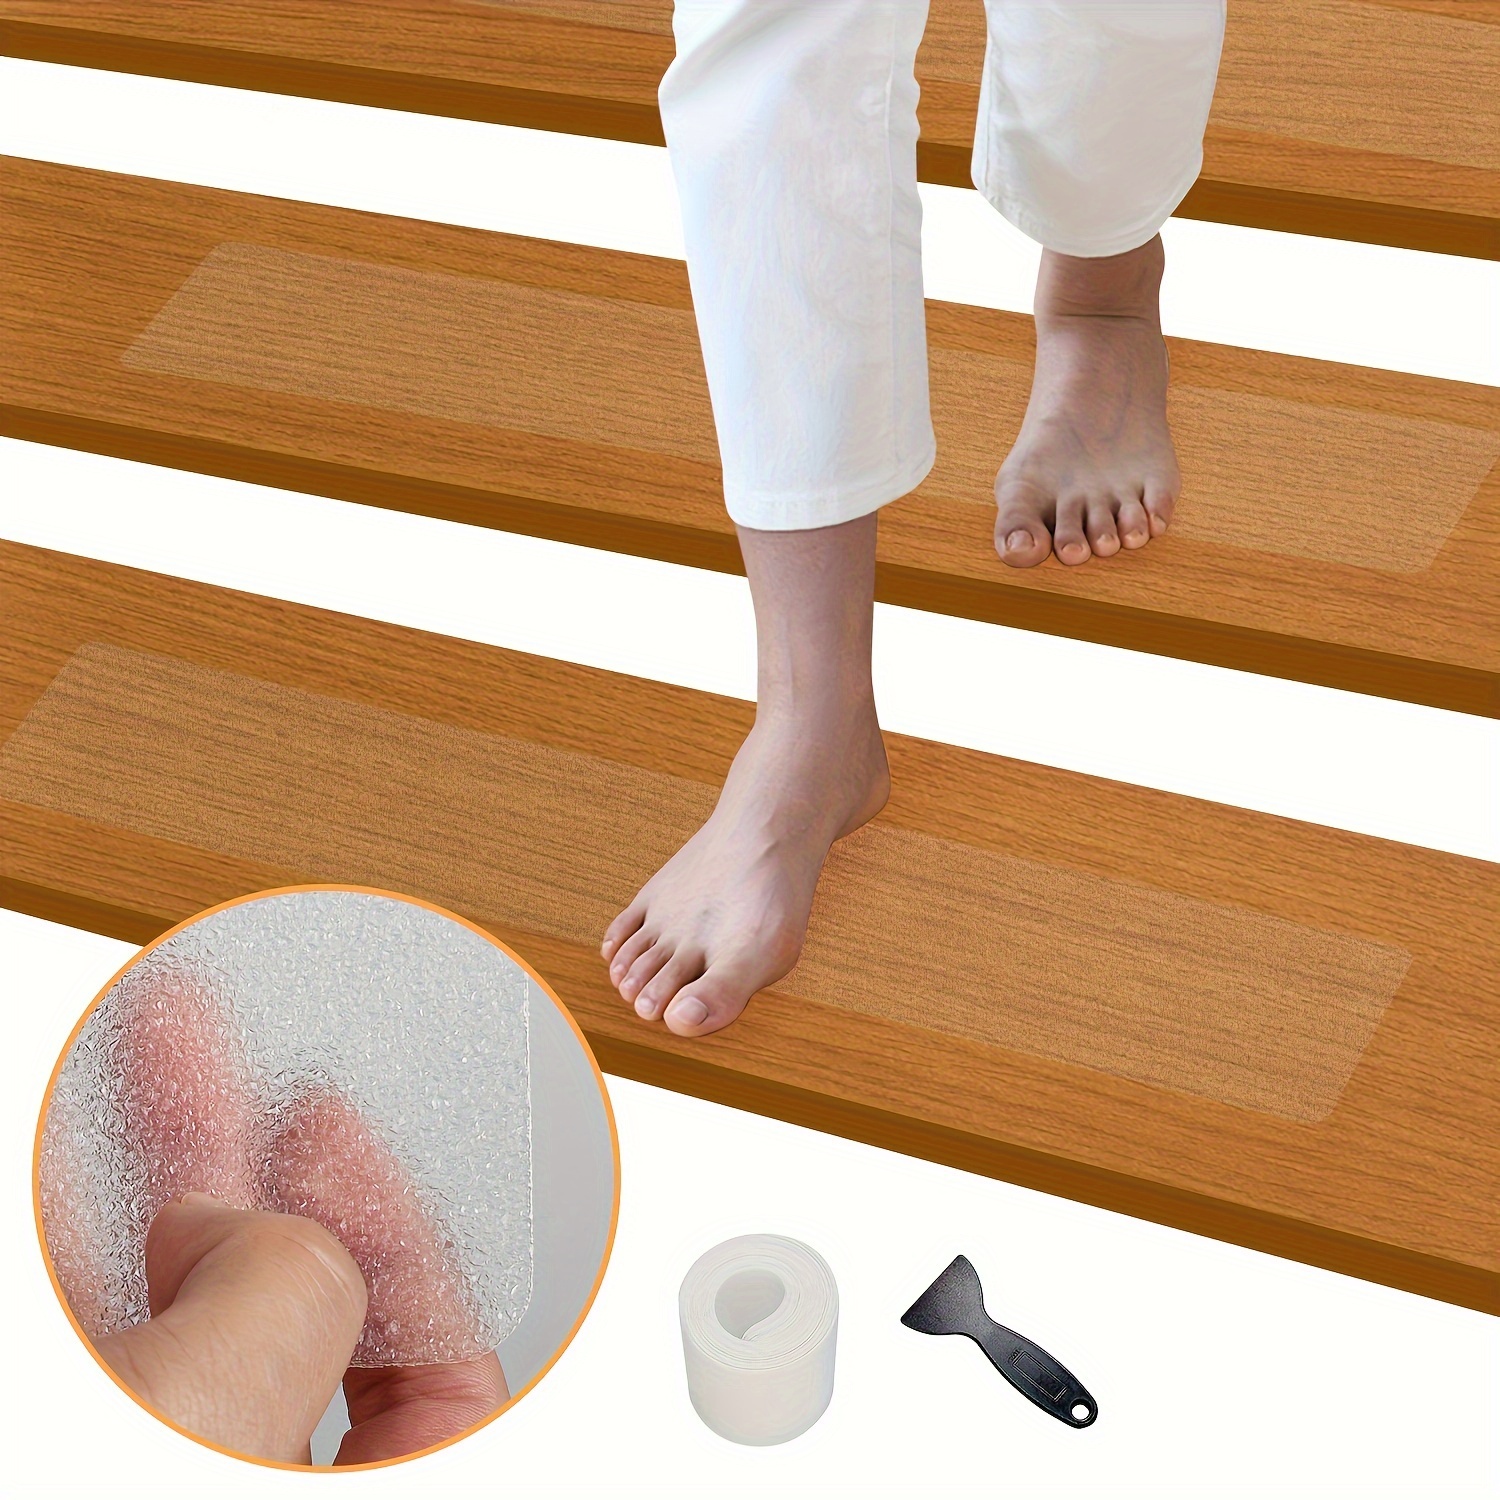 Anti-Slip Tapes are Non-Skid Tapes by American Stair Treads